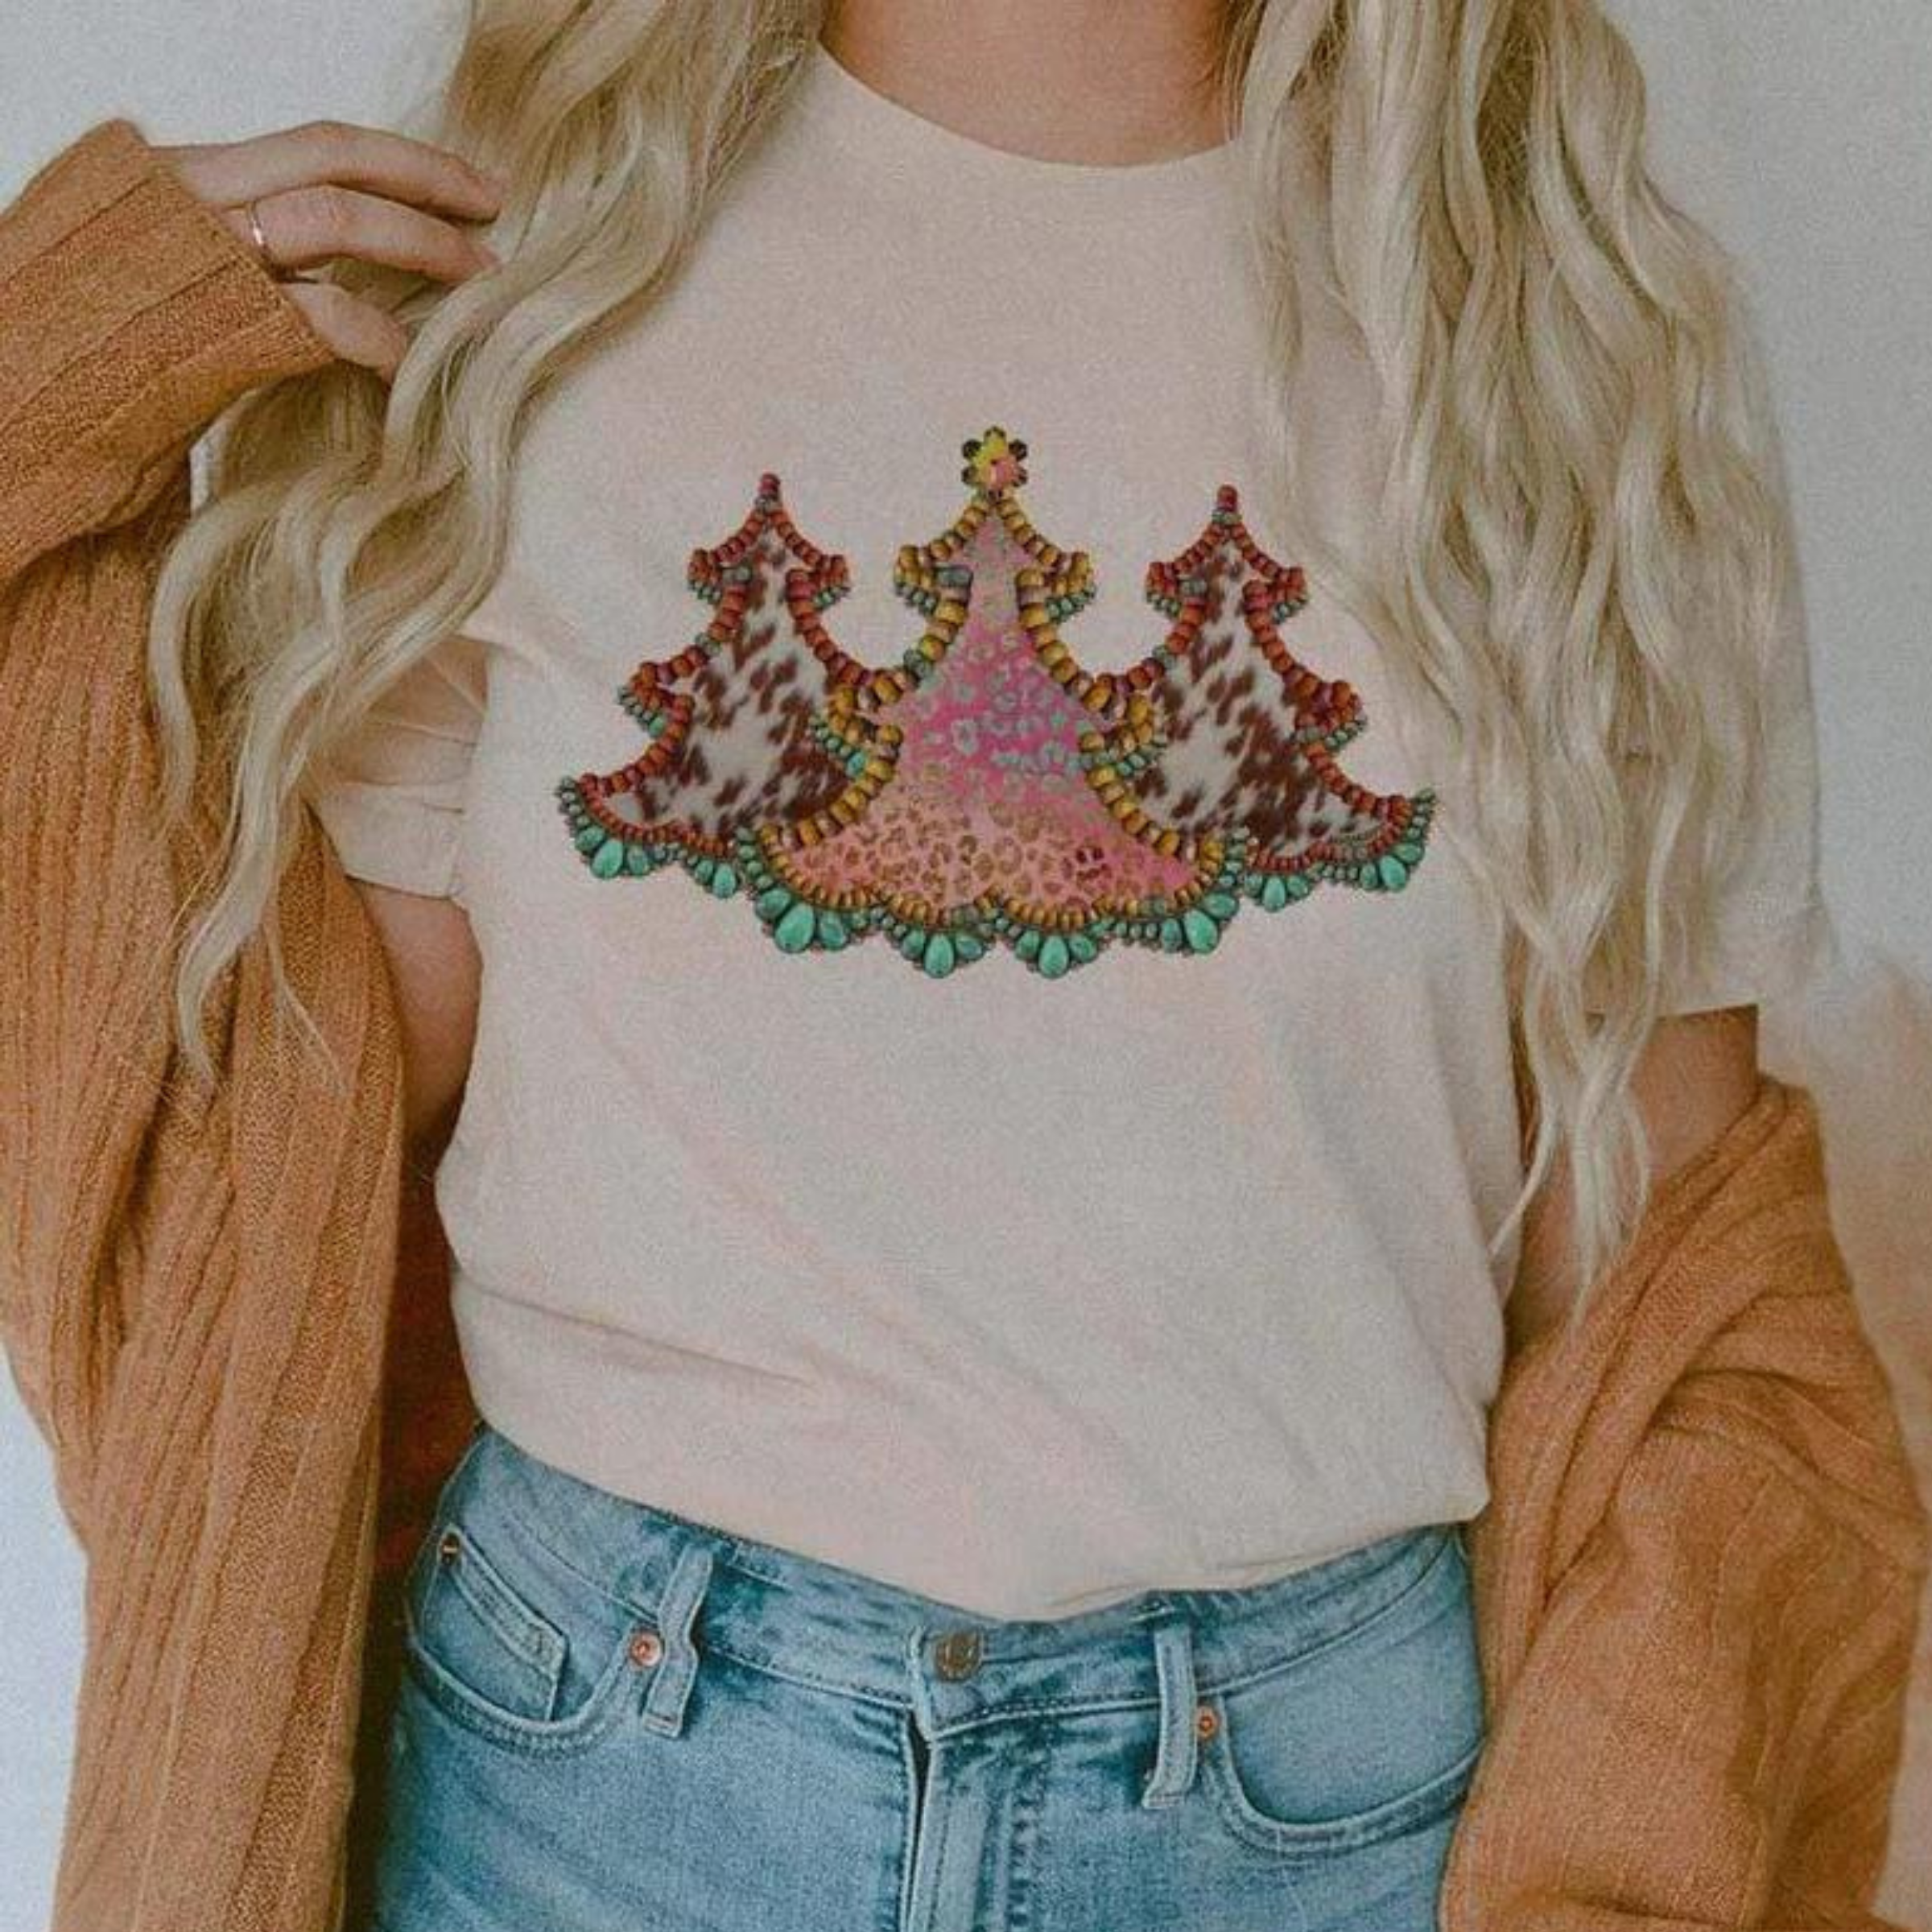 This cream tee includes a crew neckline, short sleeves, and a cute Christmas graphic with three cowprint Christmas trees side by side. The model has this graphic tee styled with rolled sleeves, a camel cardigan, and a pair of light wash denim jeans. 